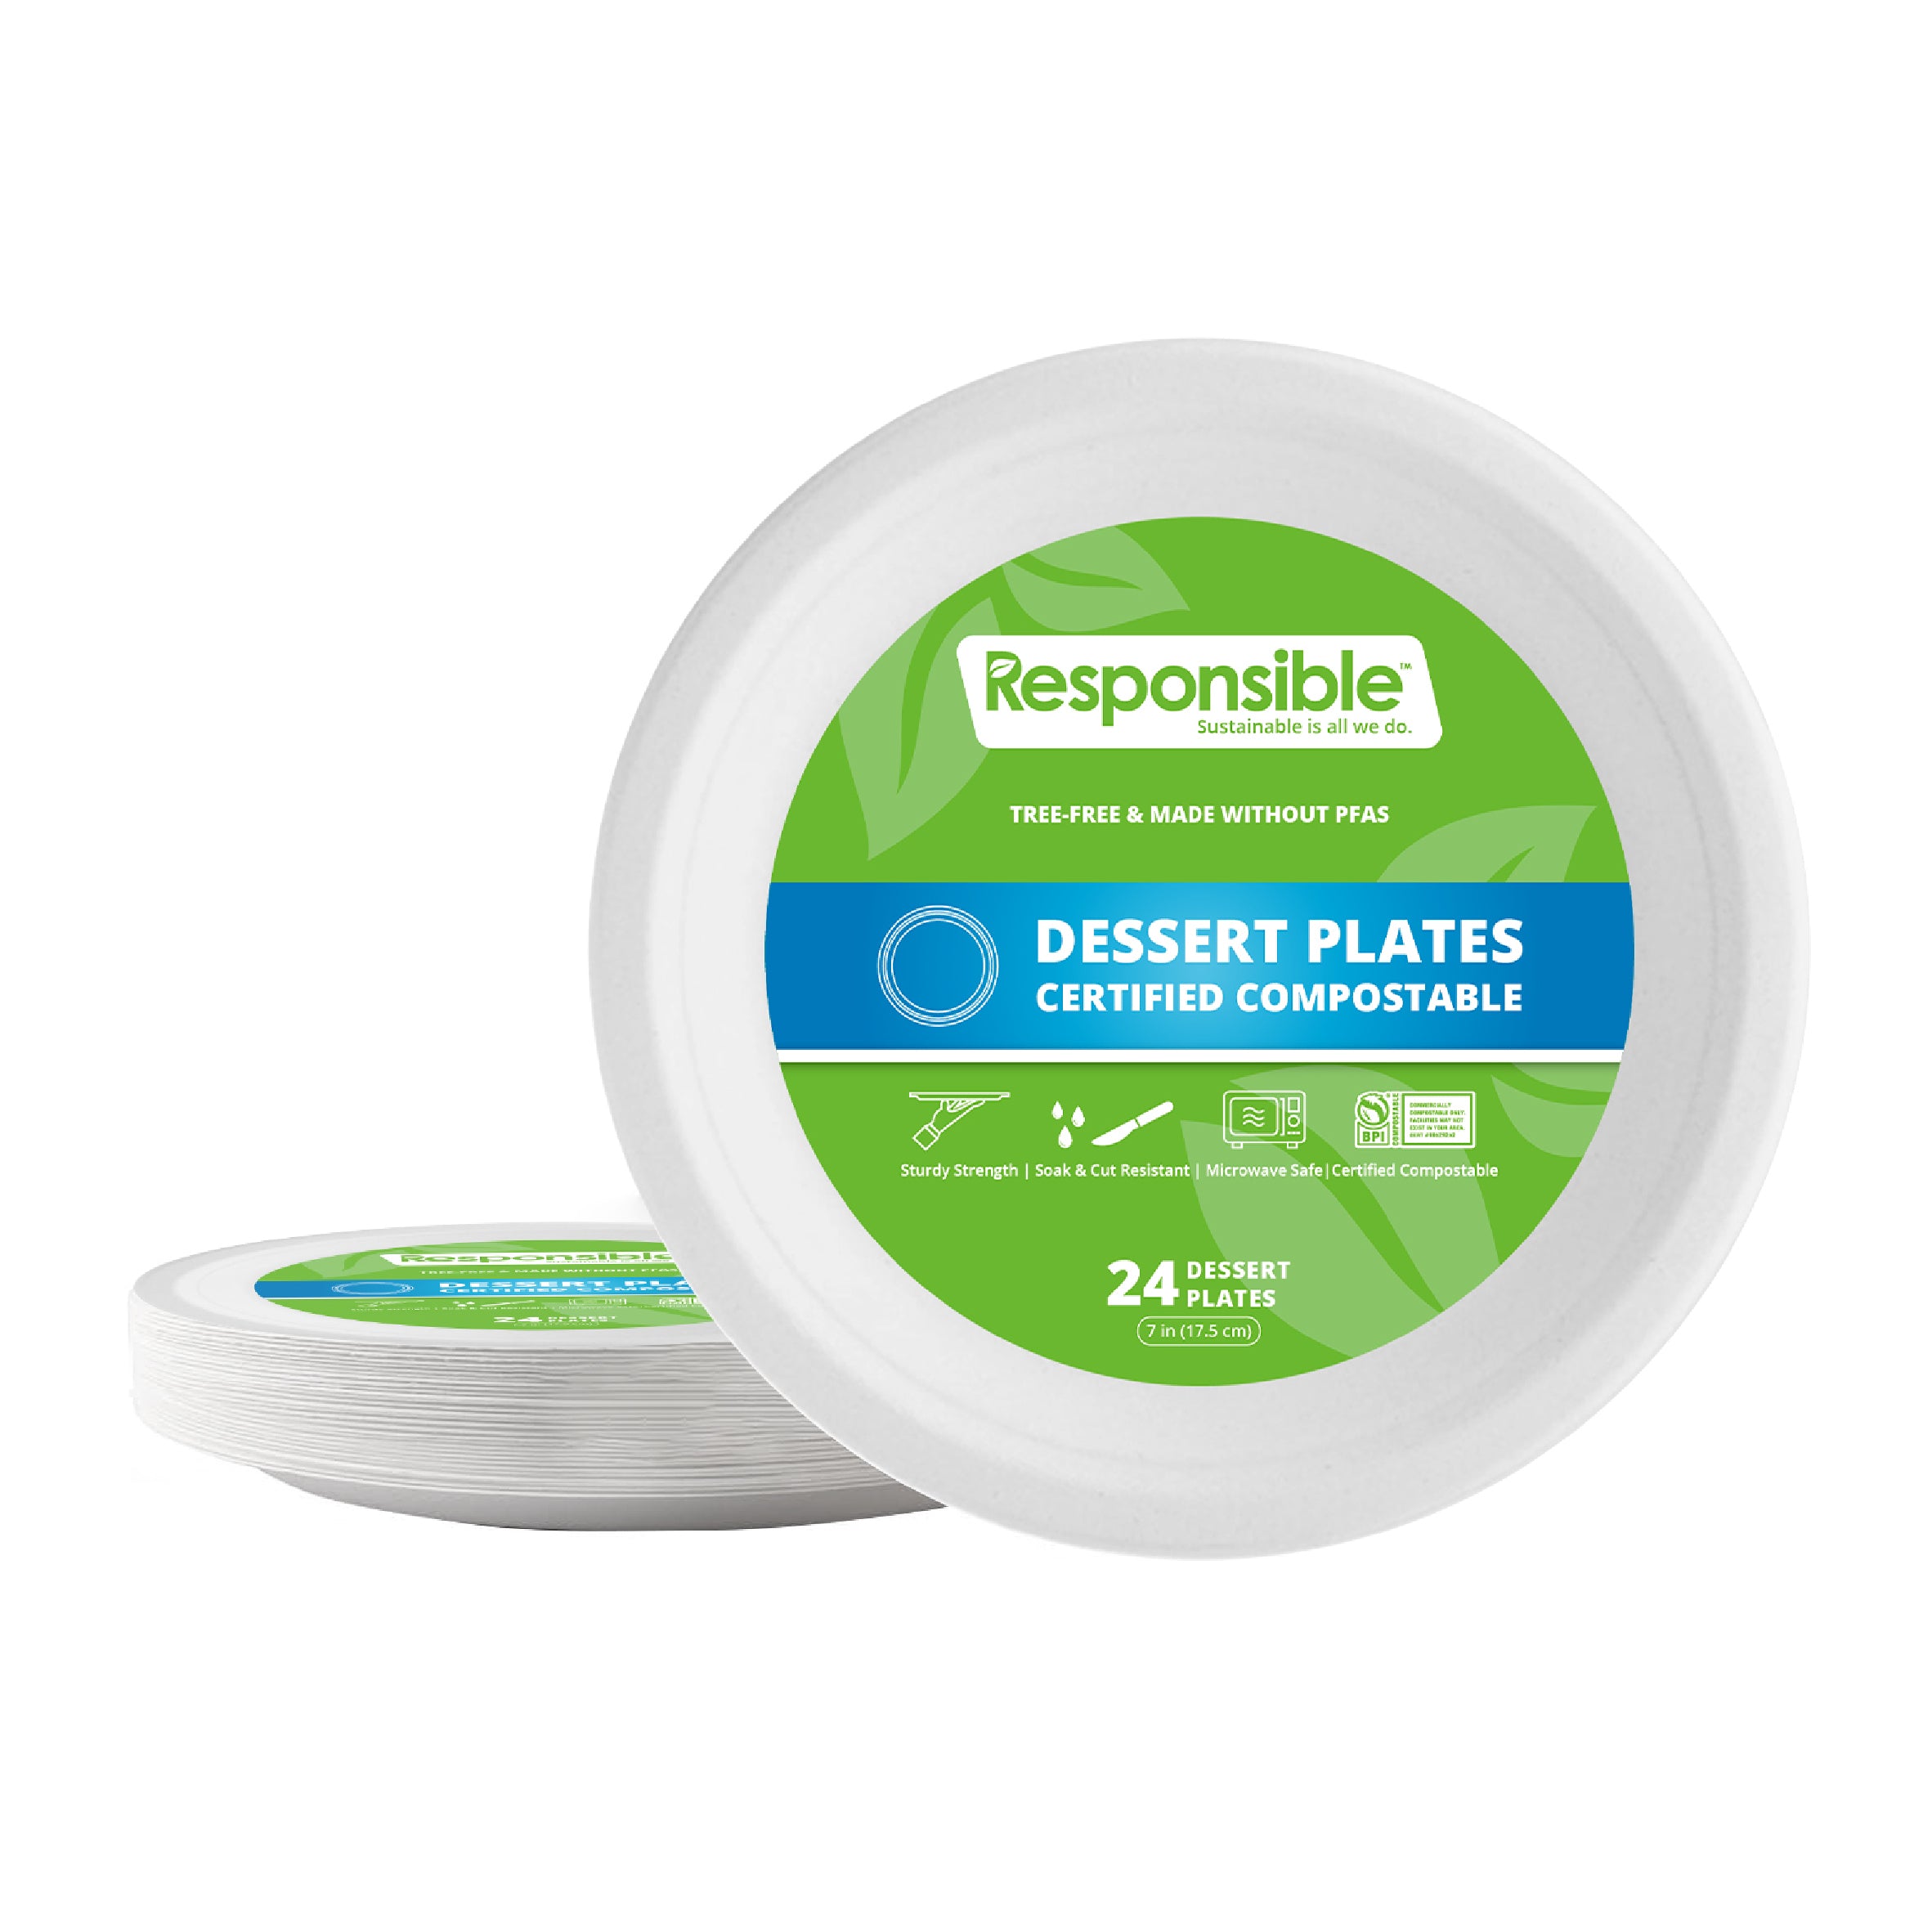 Compostable 7 Inch Round Plates